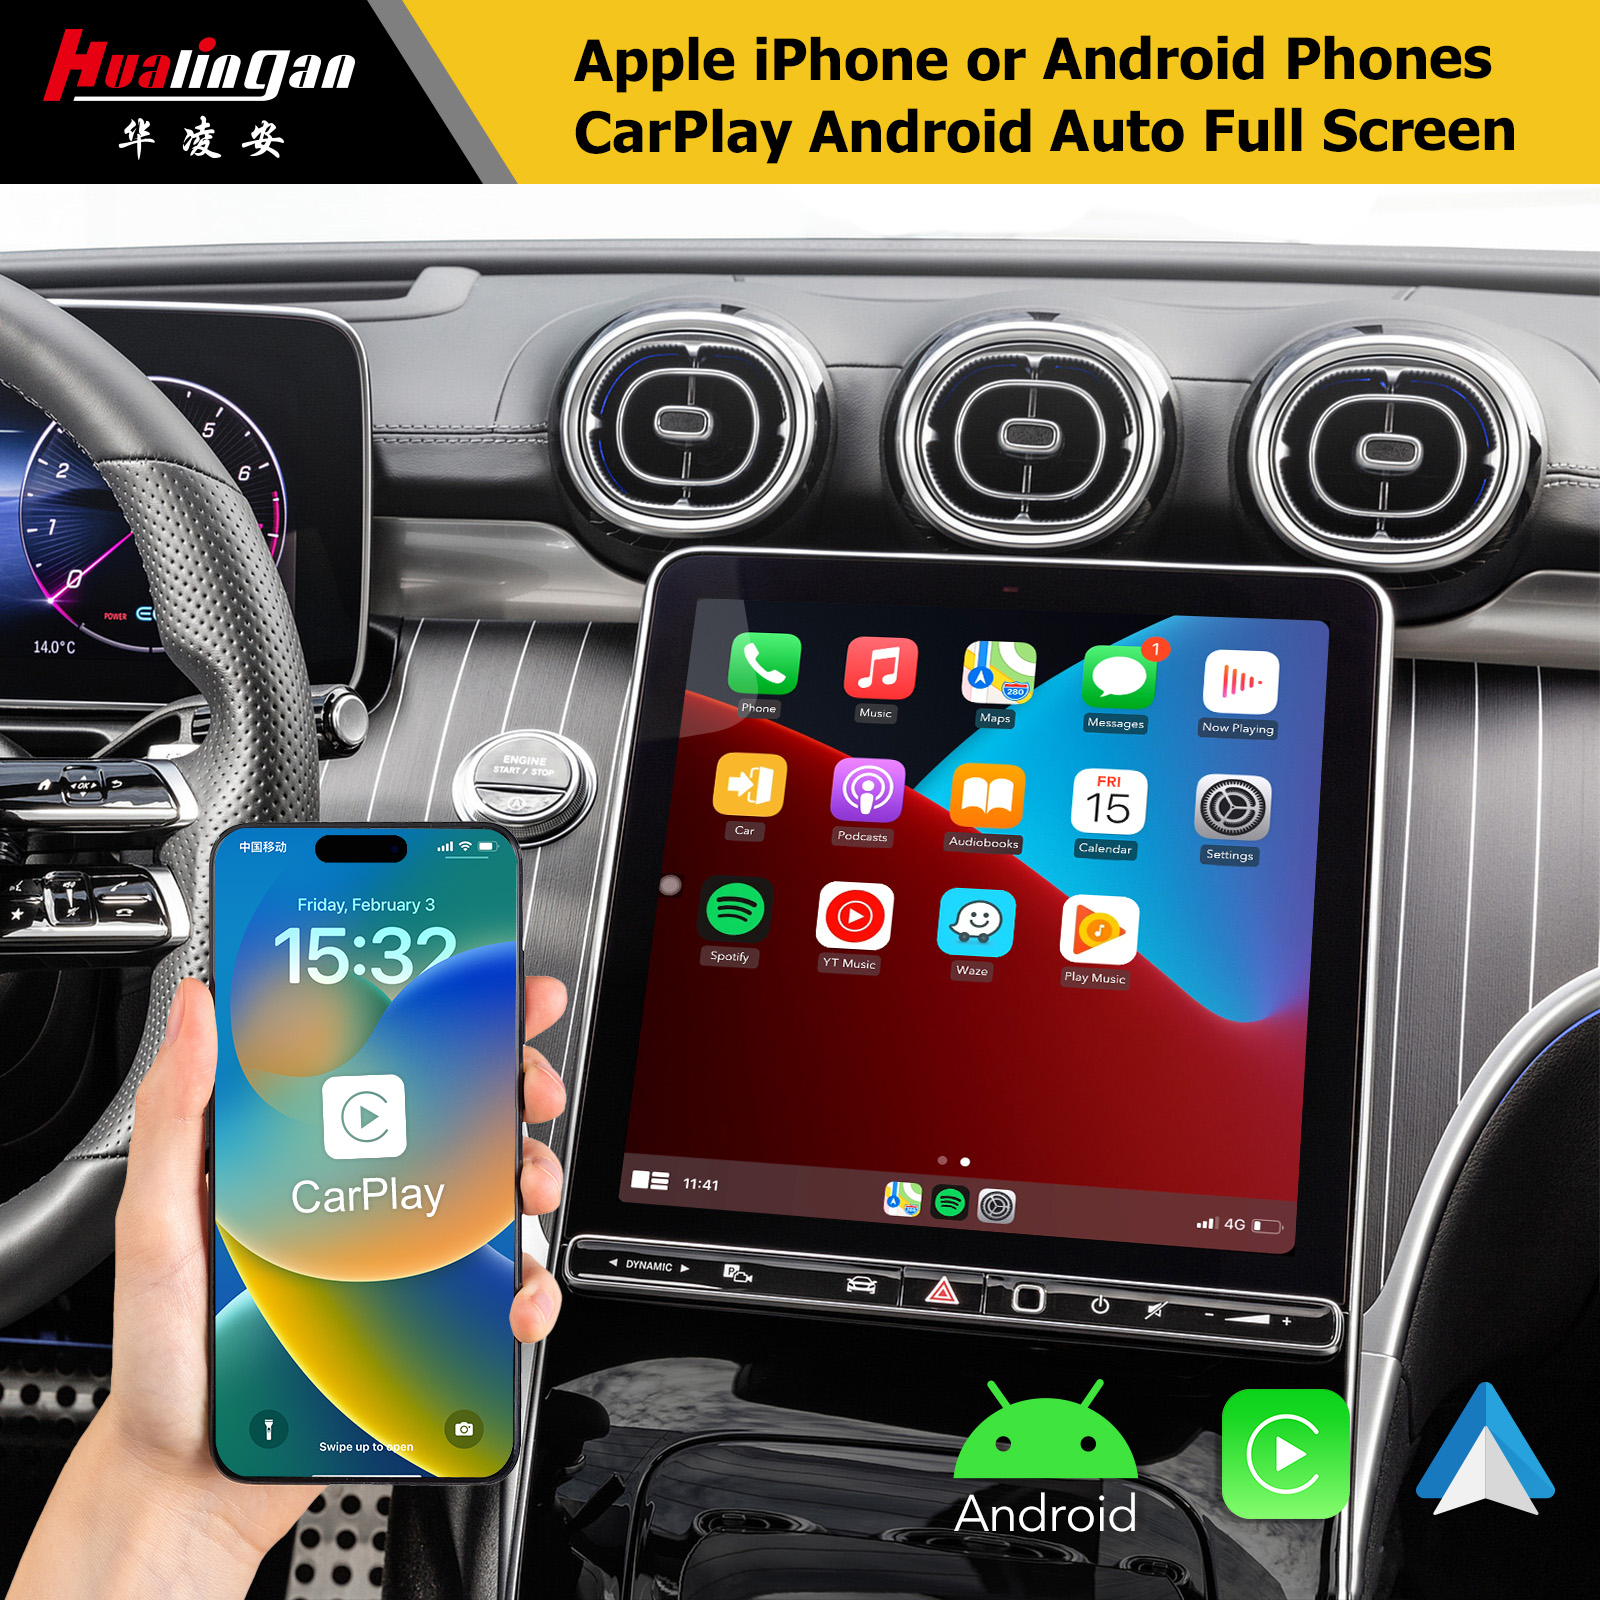 Hualingan Mercedes Benz NTG 7.0 Apple CarPlay Upgrade Wireless Android Auto Multimedia AI Box Android Navigation Aftermarket Multimedia Video interface HL4042.jpg